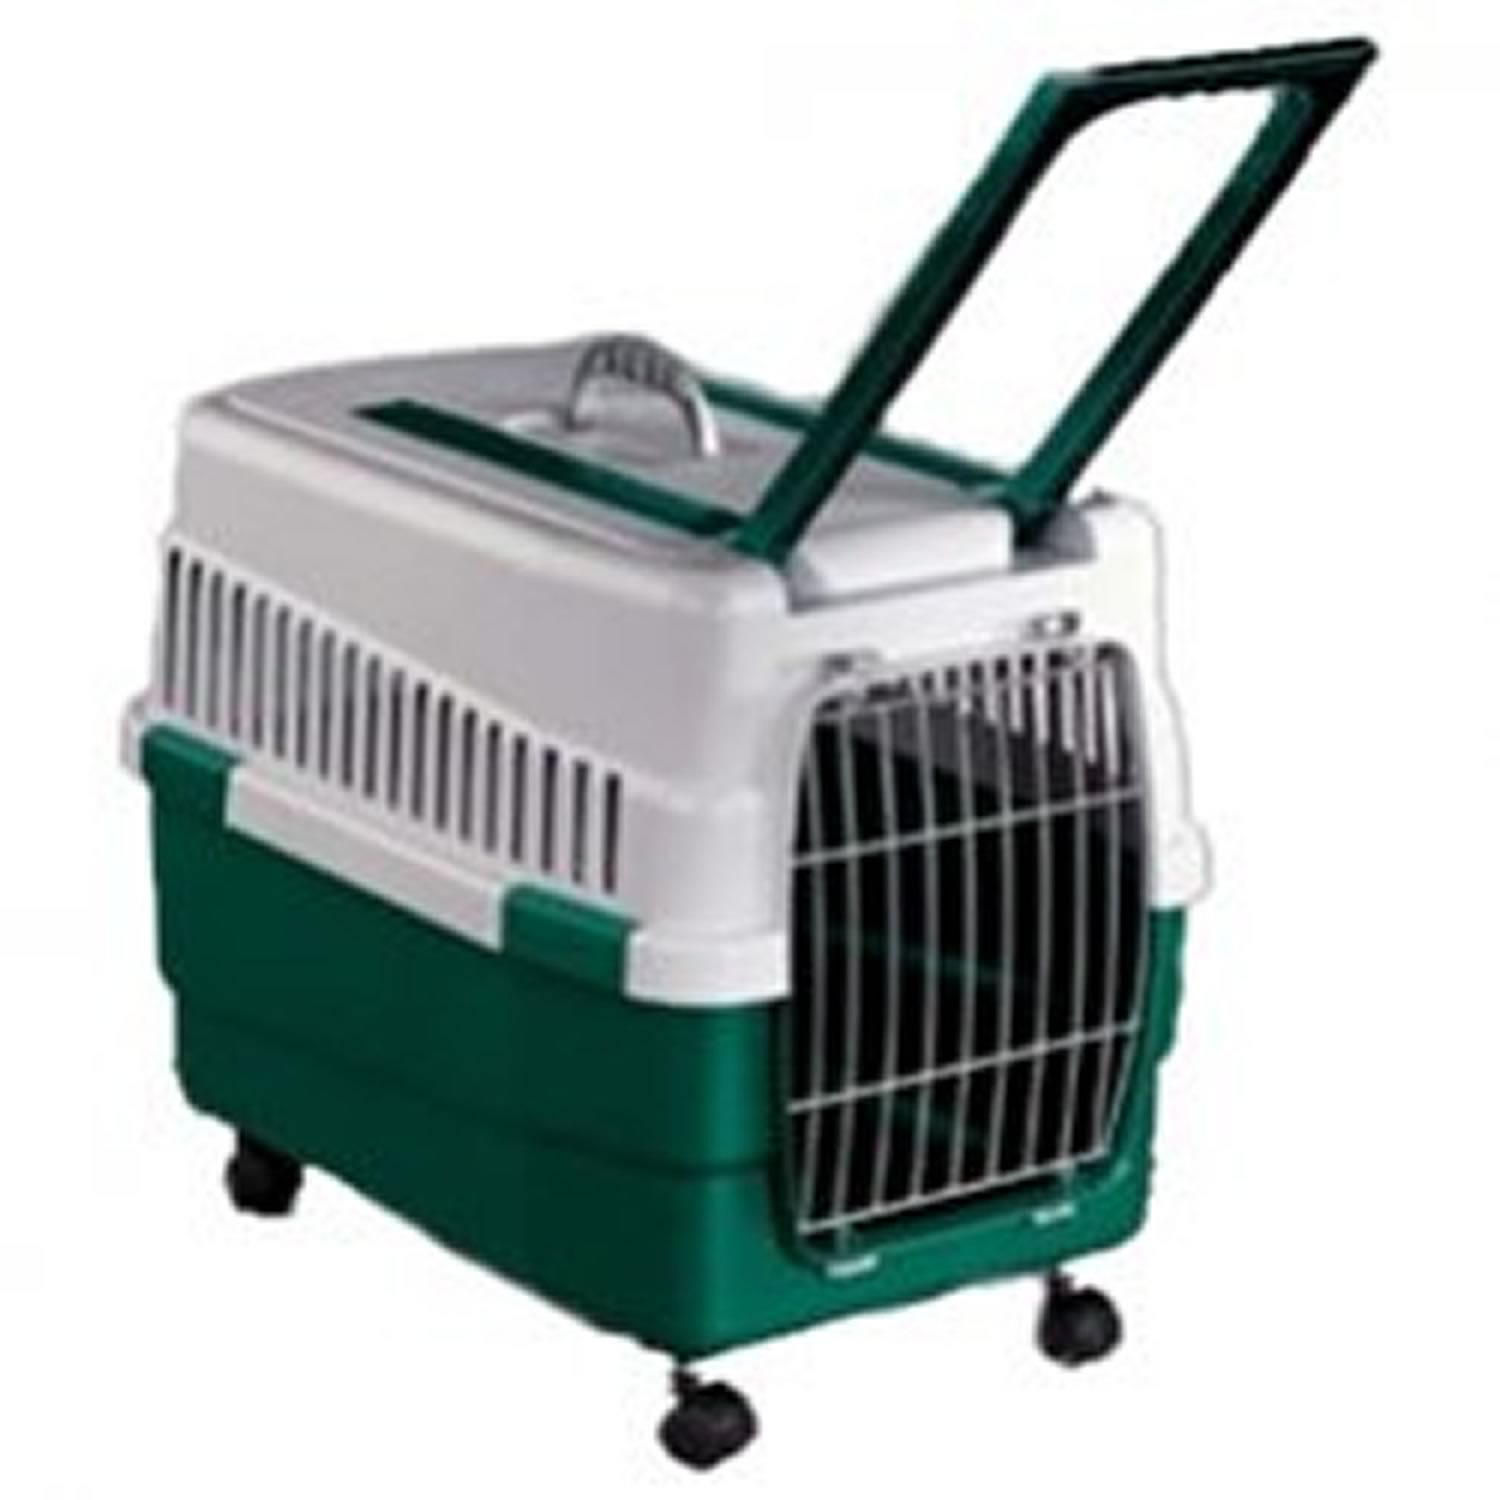 PET CARRIER WITH WHEELS AND HANDLE, CARRIERS, DOG KENNELS